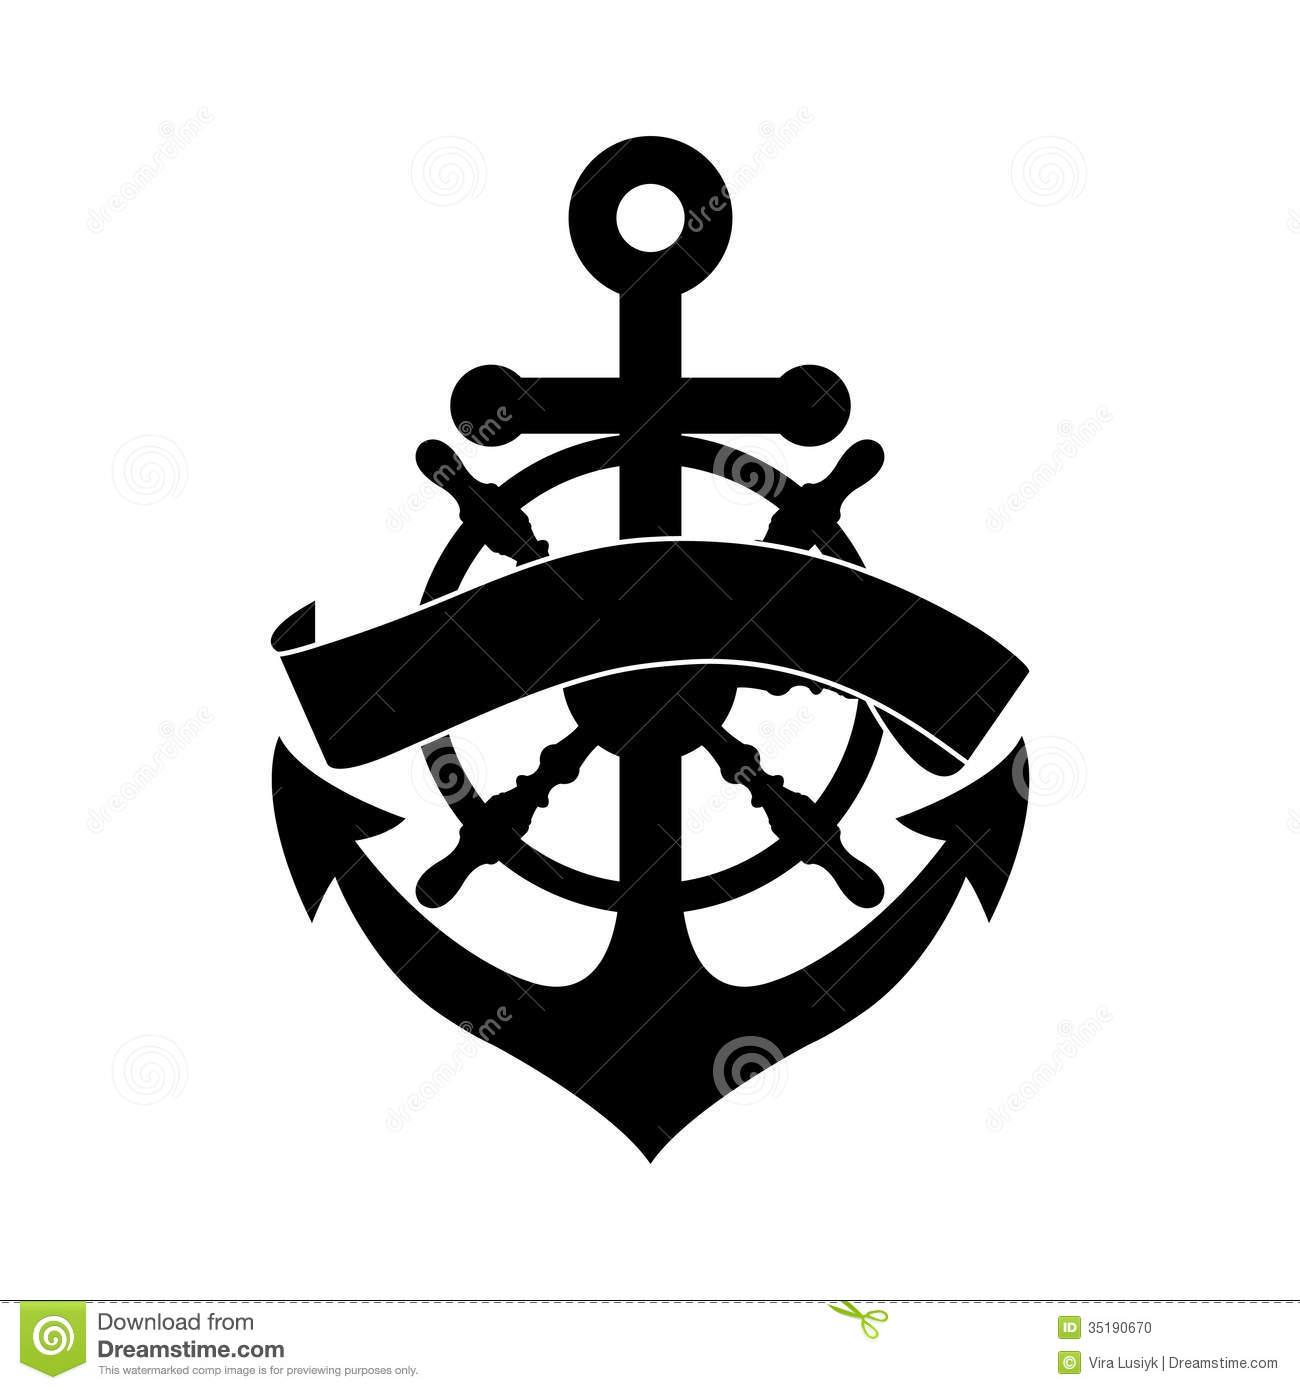 Wheel And Anchor Stock Photo   Image  35190670